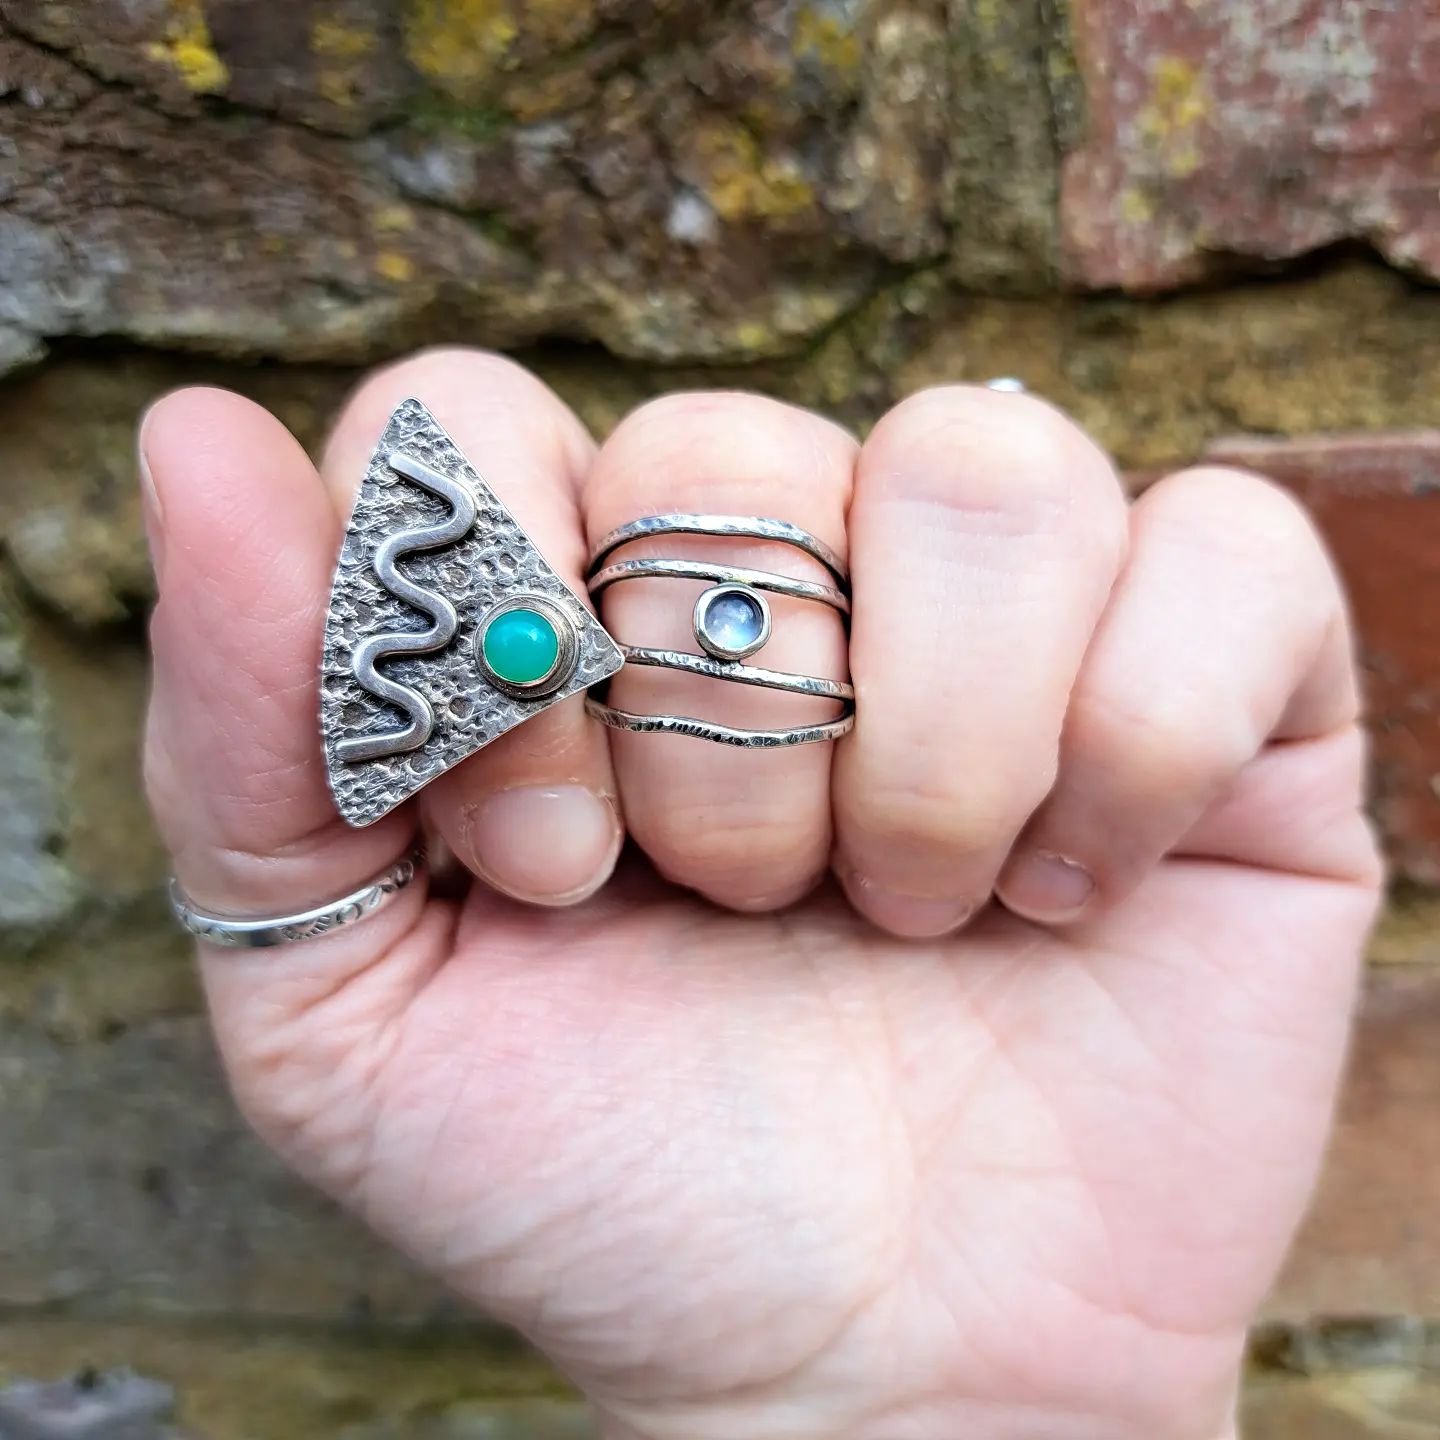 Chrysoprase is a beautiful green stone - it kind of has a milky or misty quality to it, so I went all out on texture to make it POP out of this triangular ring.  The other ring is a moonstone, nestled in strands of lightly hammered sterling silver. I